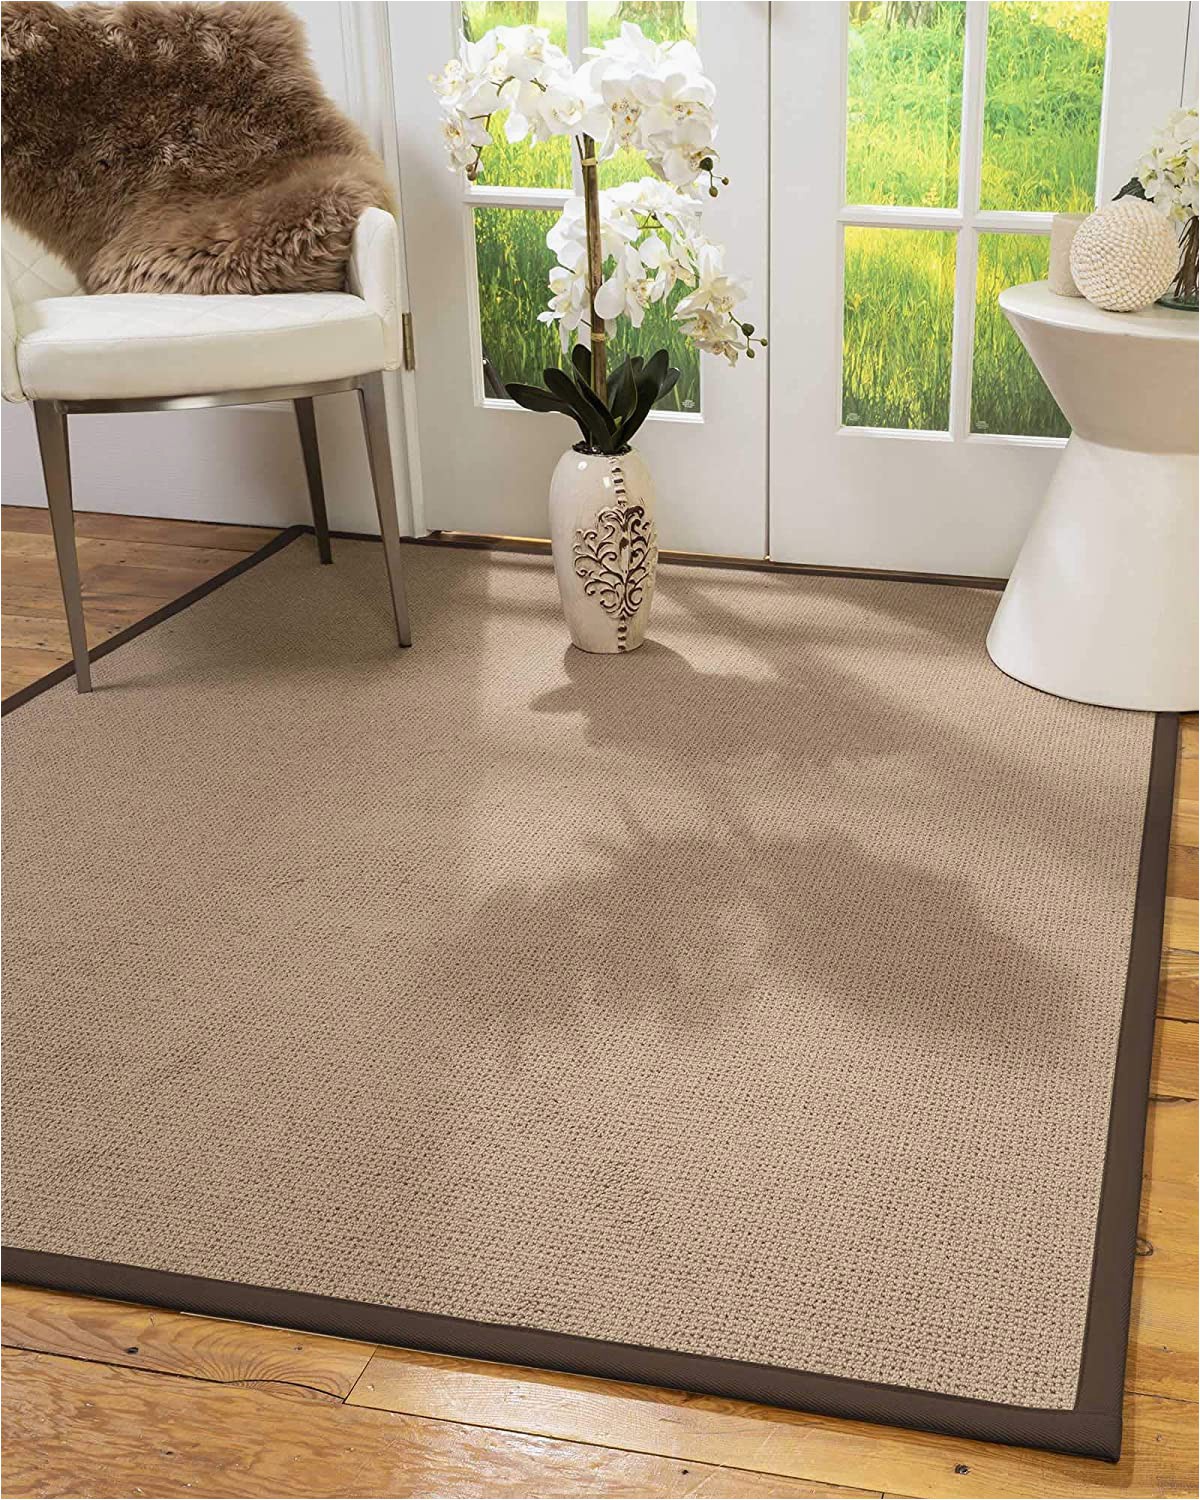 Eco Friendly Wool area Rugs Amazon Natural area Rugs Natural Fiber Handmade